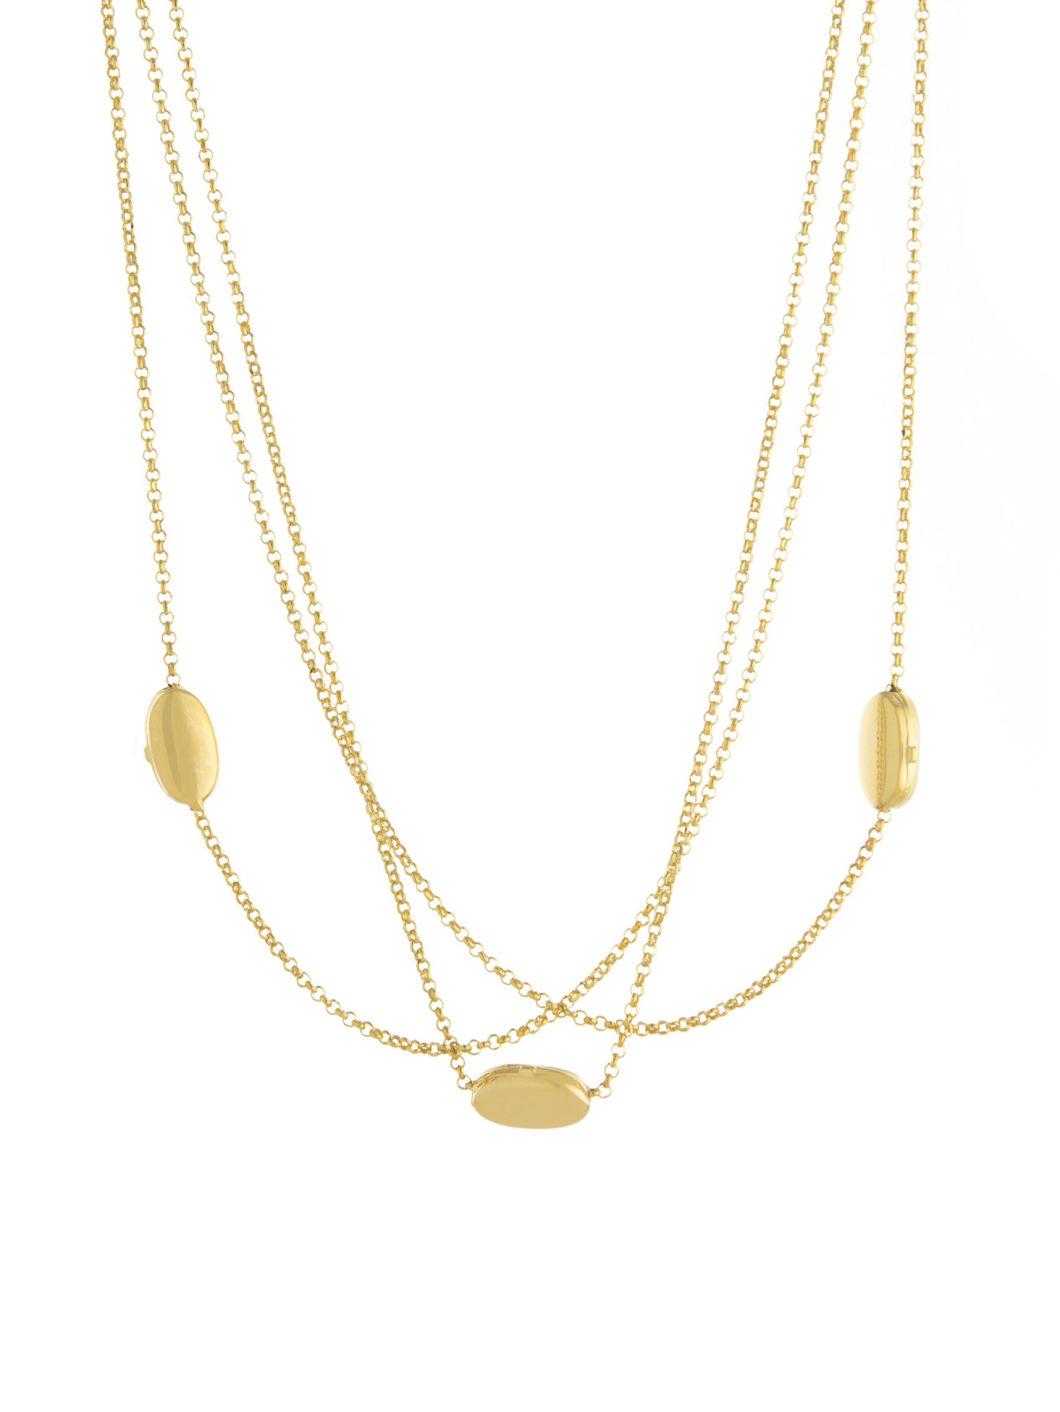 Irregular Multi-Layer Necklaces Are Popular in Europe and America